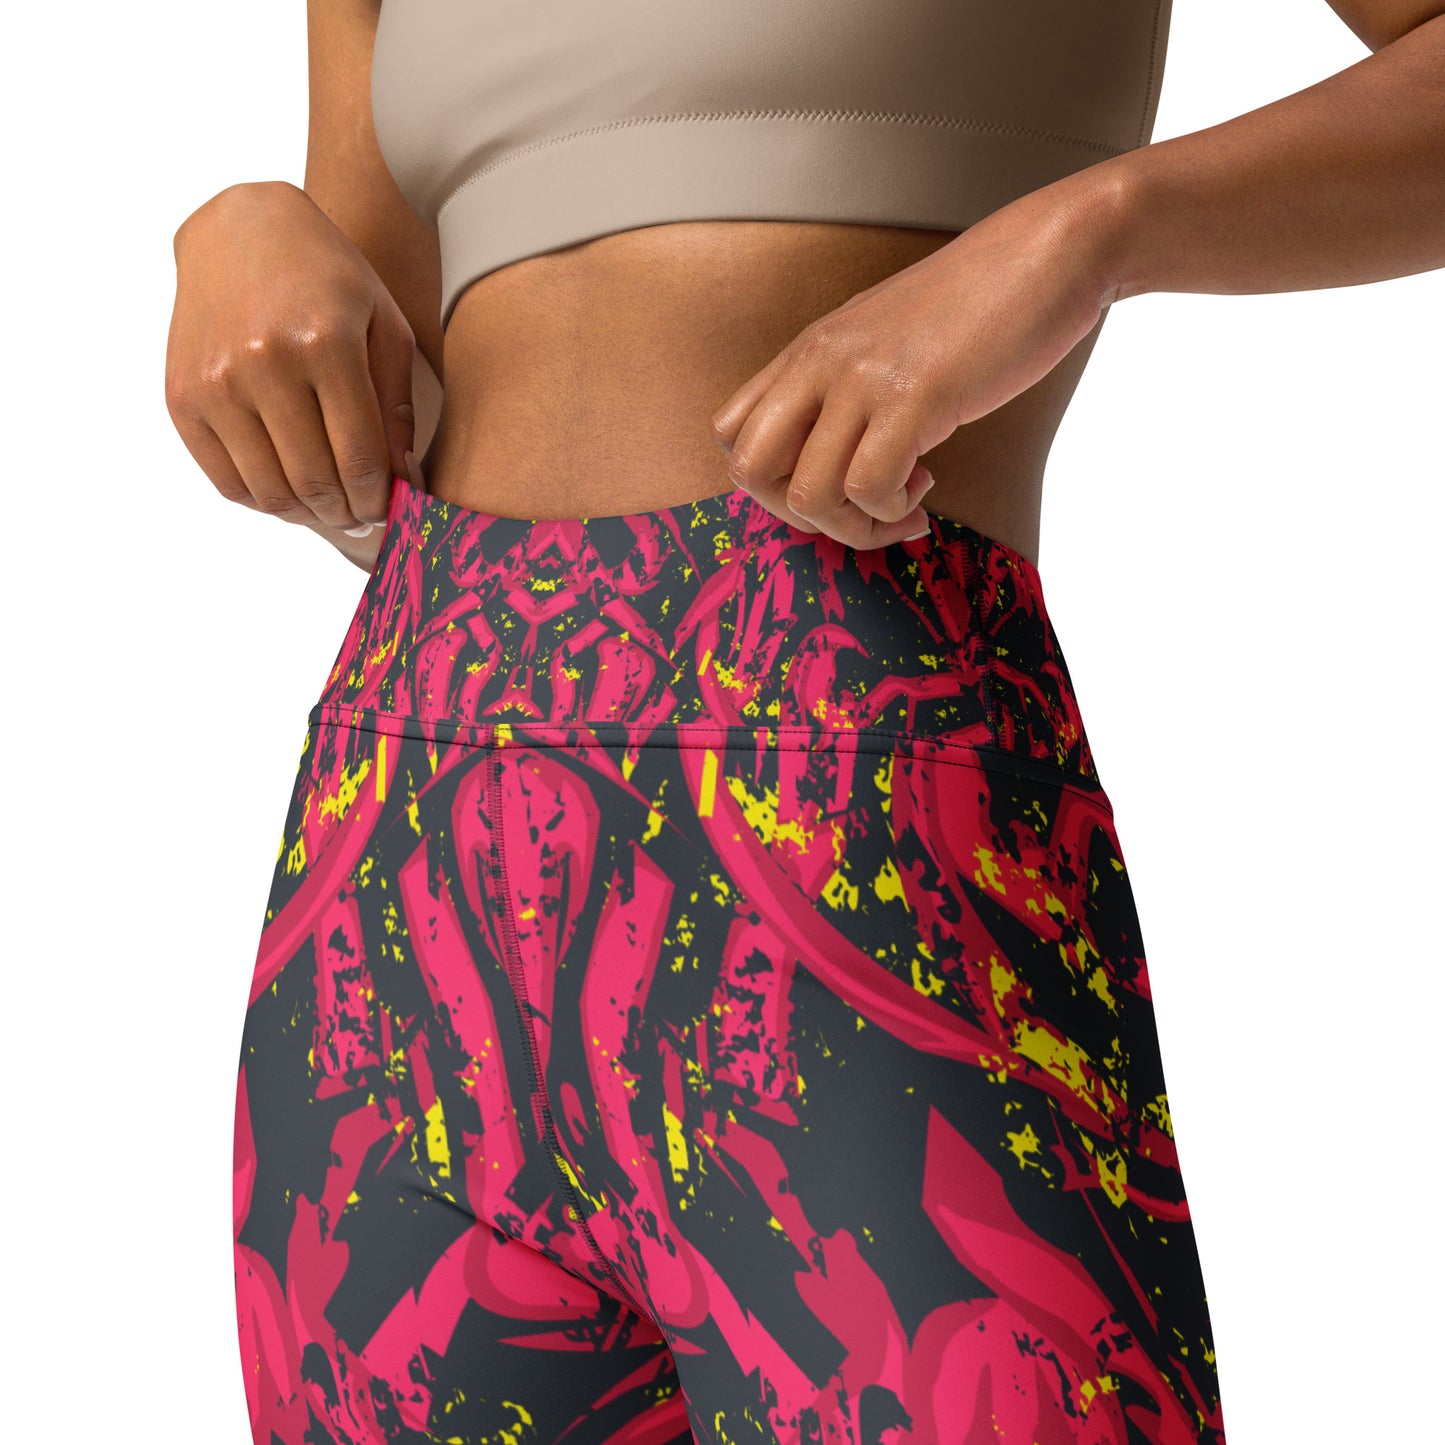 Women's Sports Leggings with Pockets, High Waist Red pattern